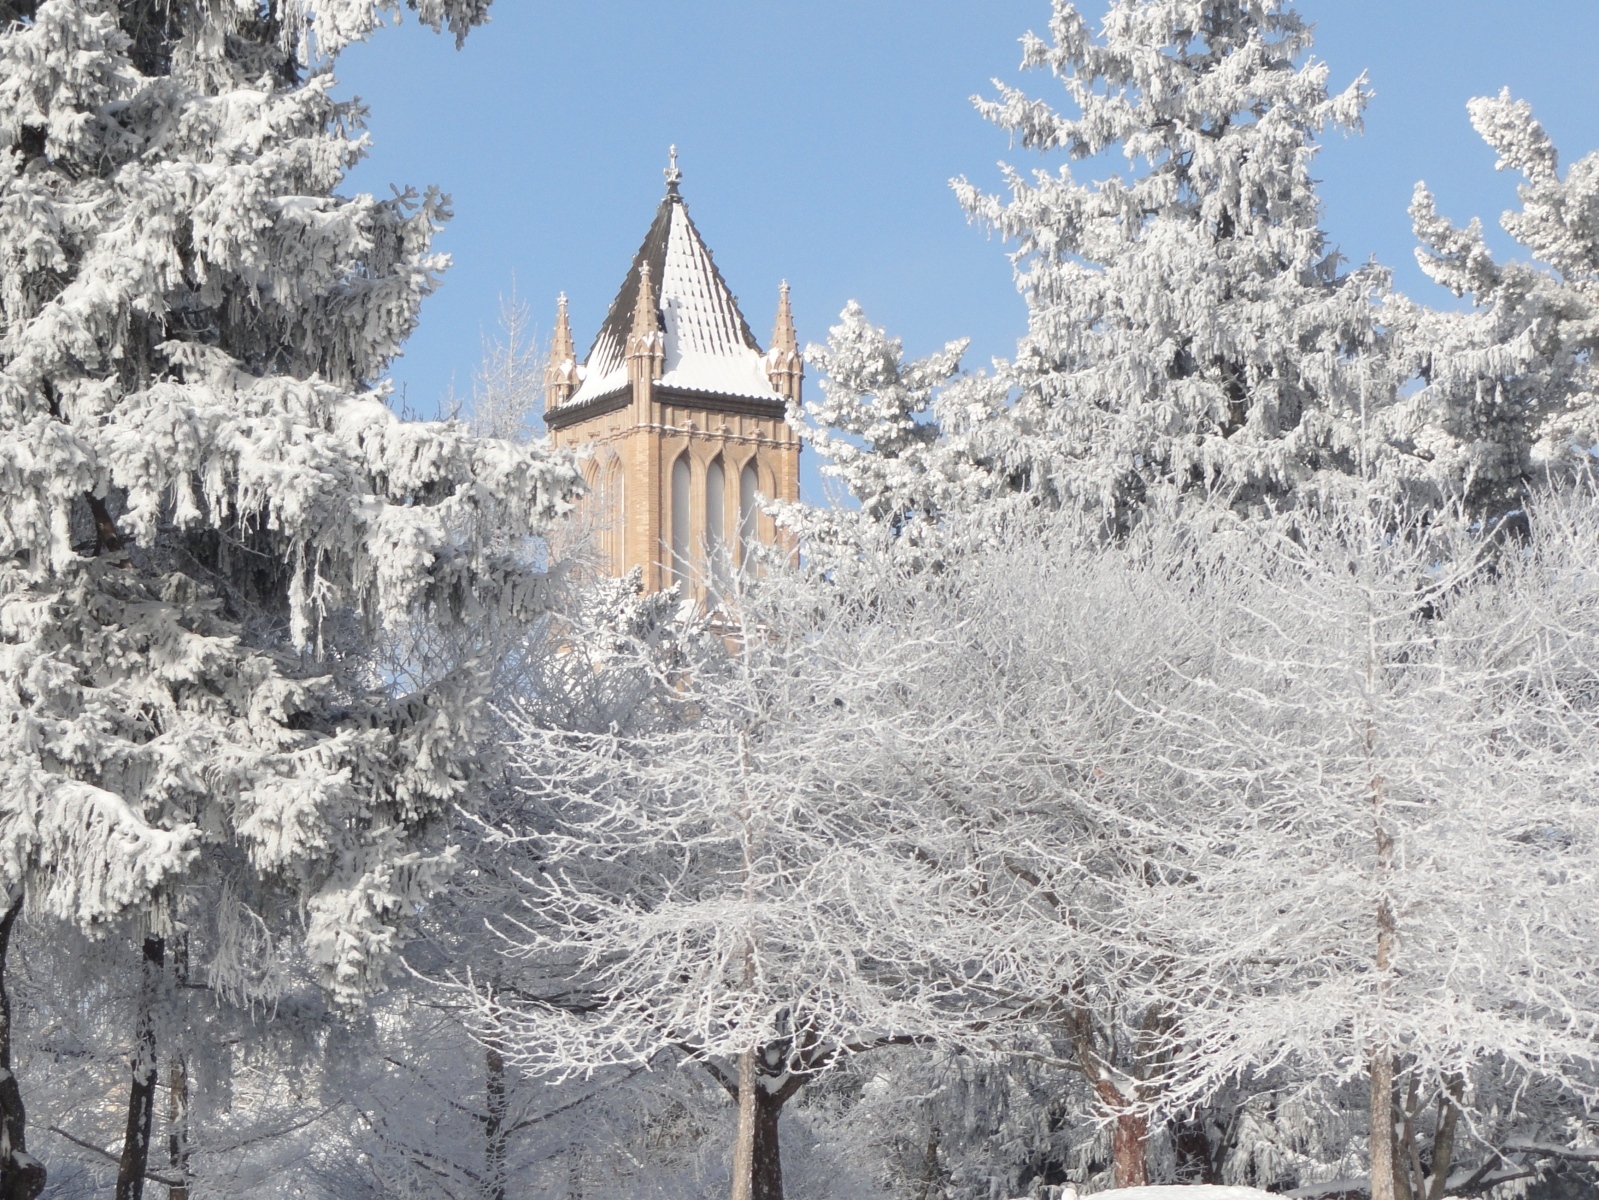 picture of Campanile and trees in winter